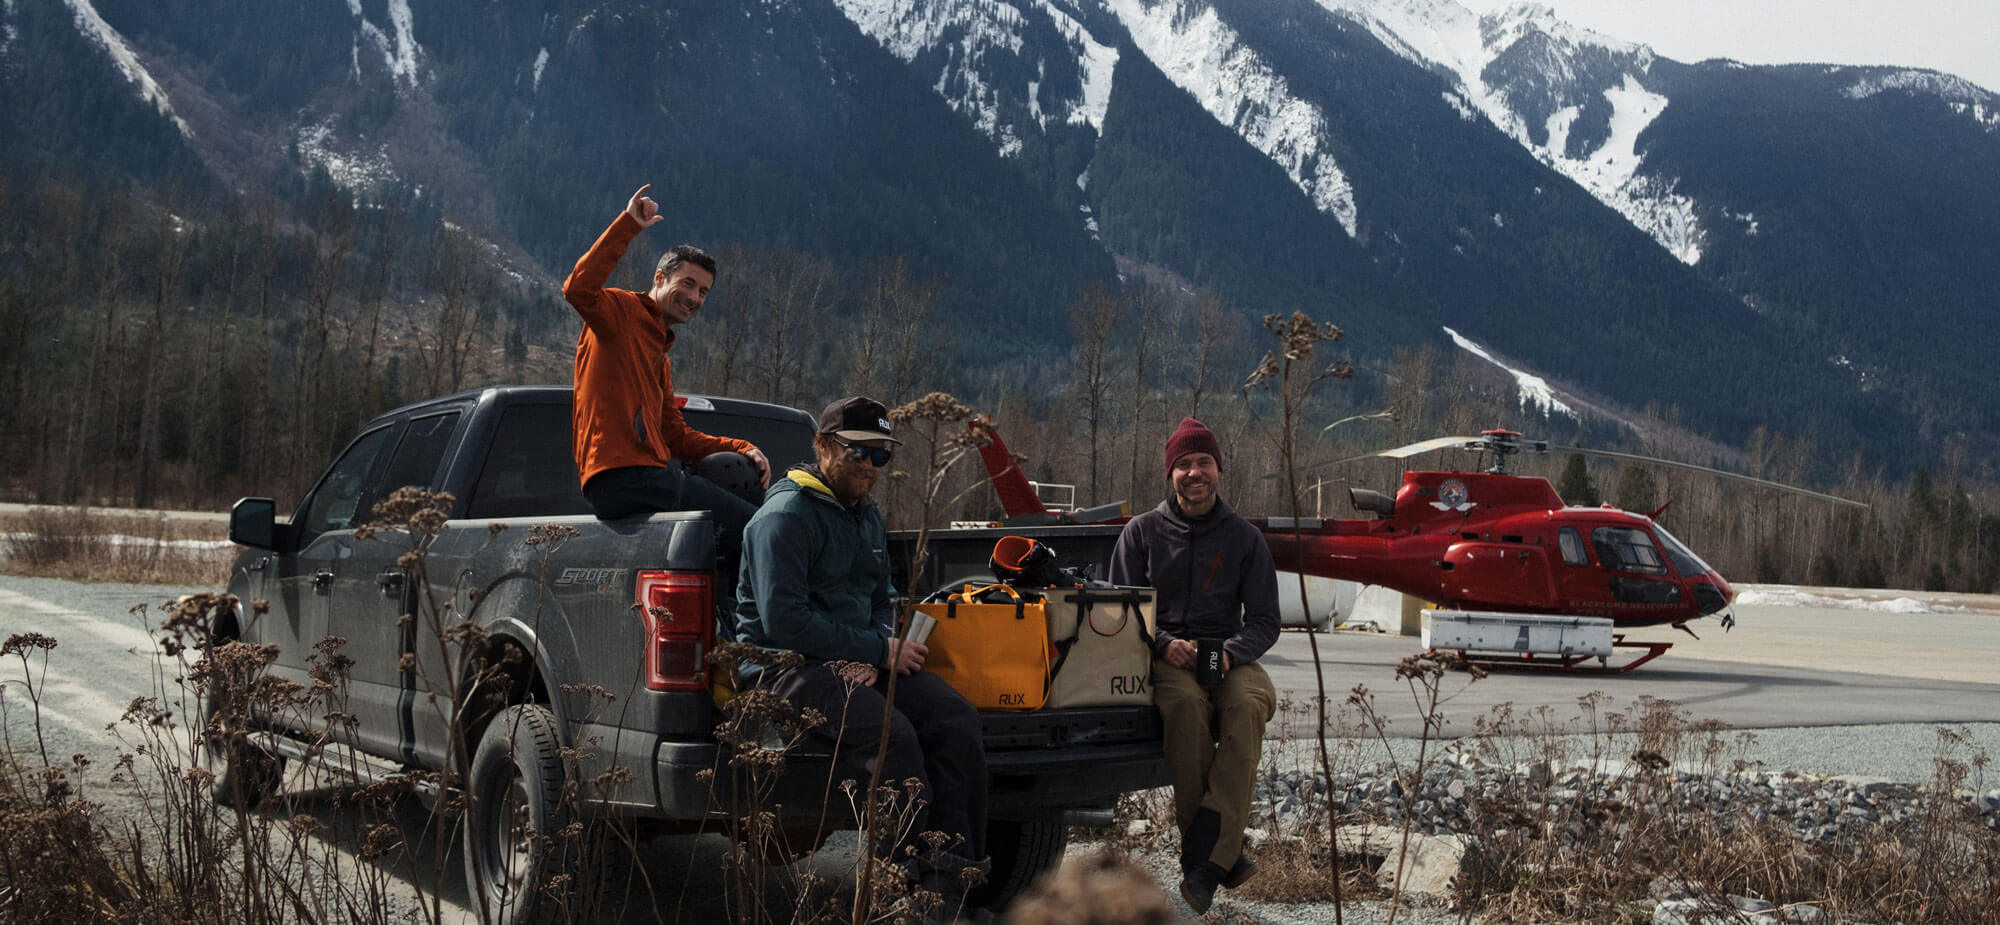 RUX Founders getting ready for a heli trip up to Whitecap Alpine